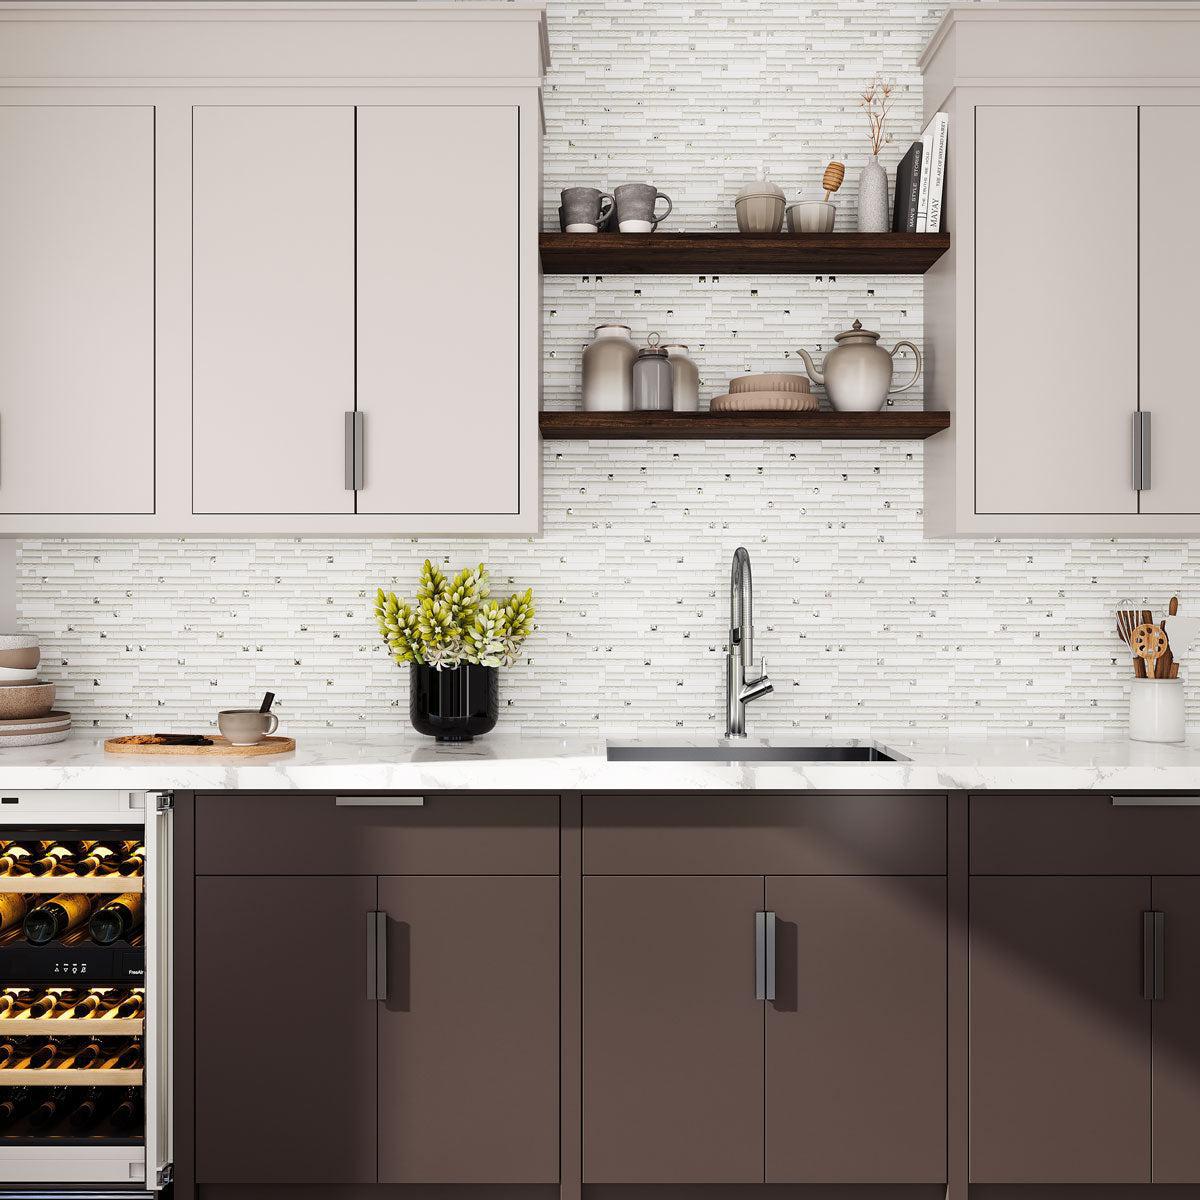 Dress up your kitchen with Ice Shale Rectangular White Glass And Stone Tile